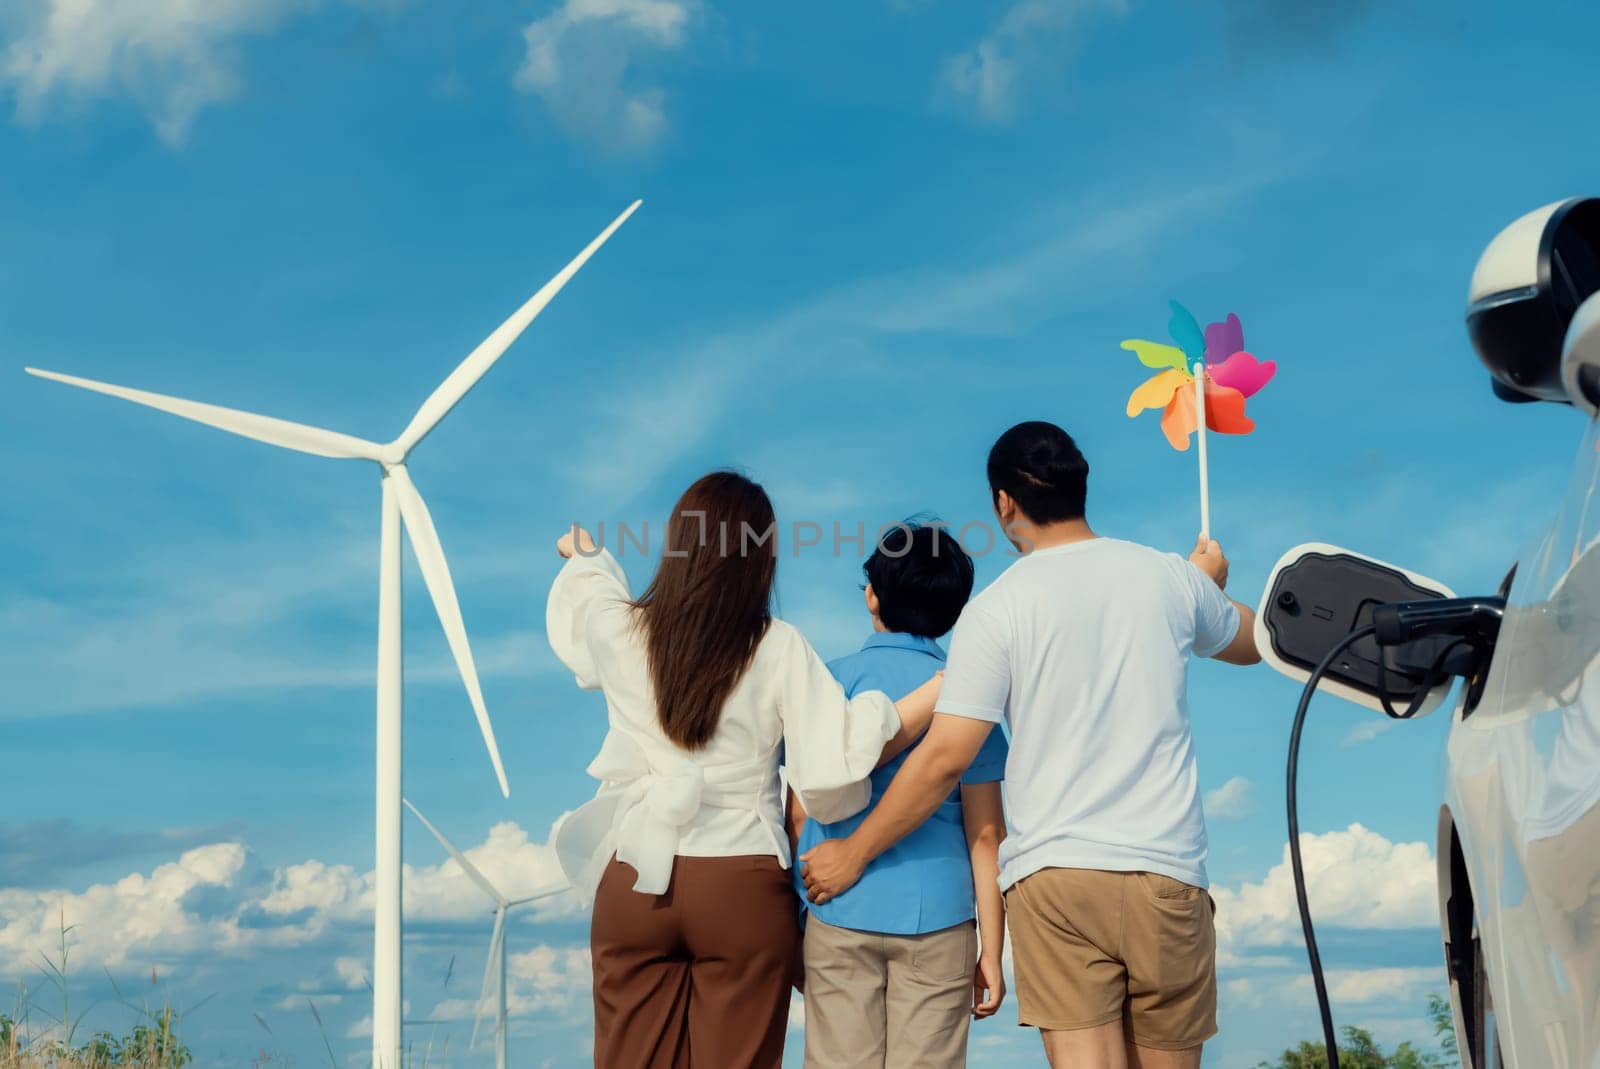 Progressive happy family enjoying their time at wind farm for green energy production concept. Wind turbine generators provide clean renewable energy for eco-friendly purposes.